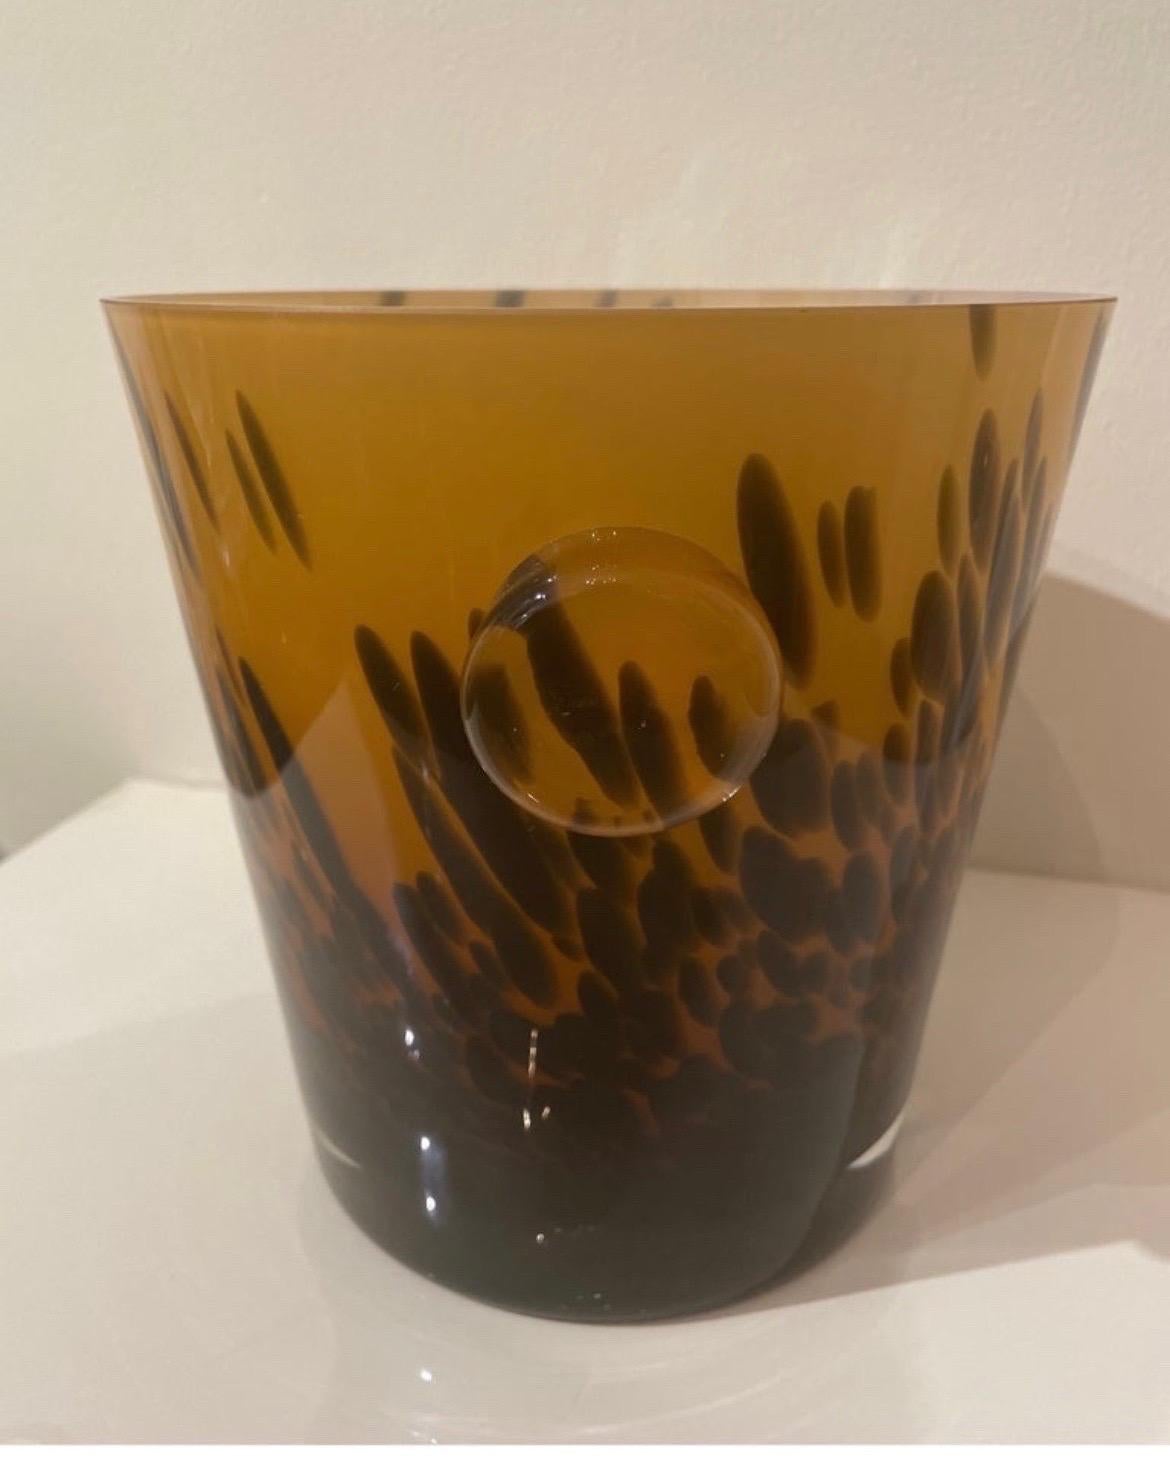 Very striking tortoise design Italian Murano Ice bucket / Wine cooler. This very attractive piece will add sparkle wherever you choose to place it.